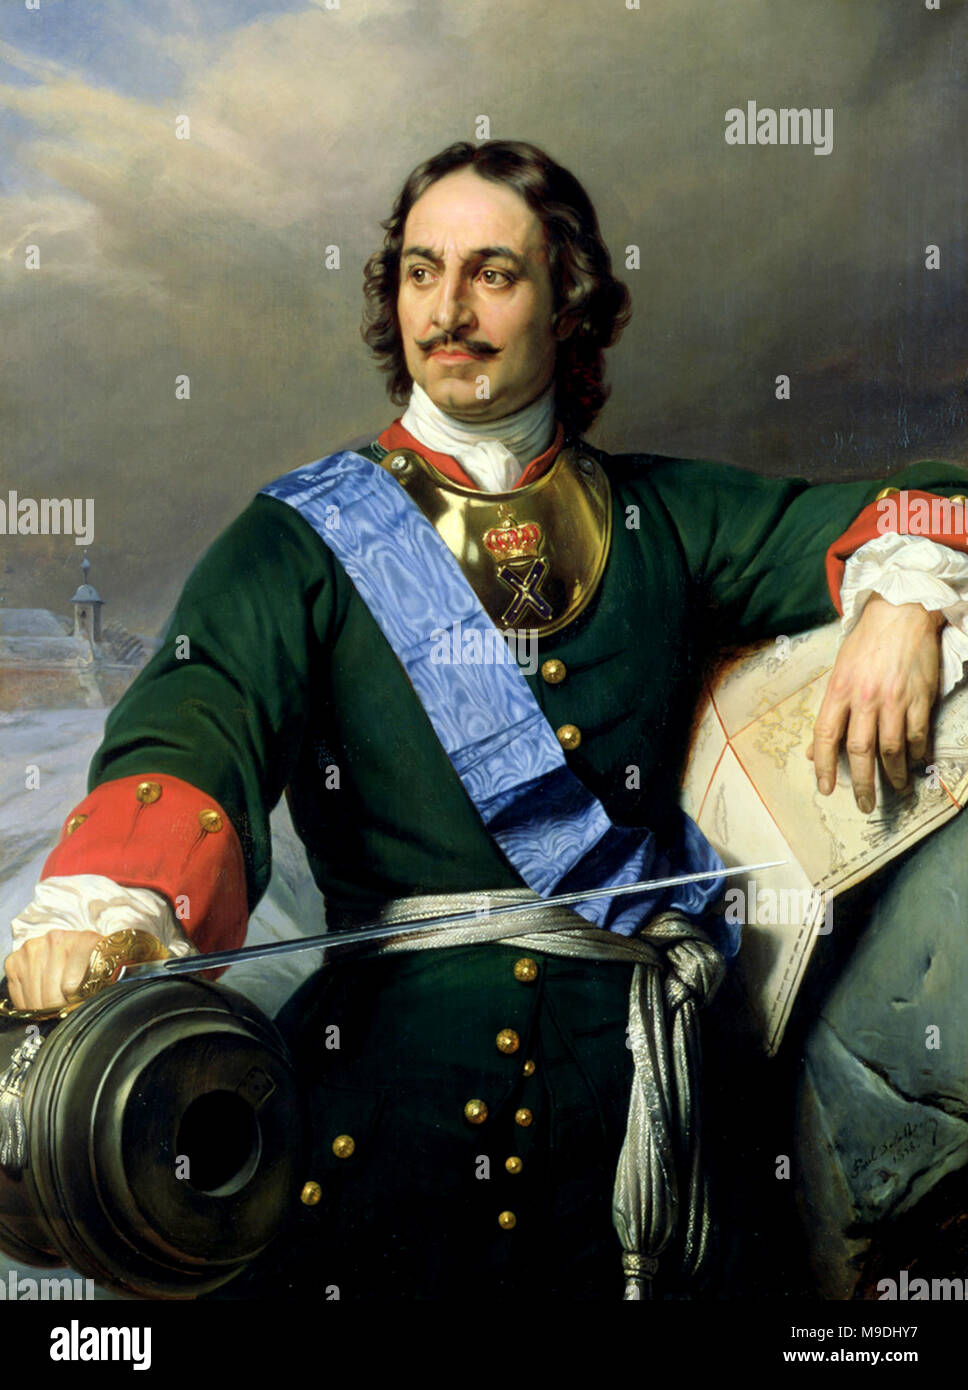 Peter the Great. Portrait of Tsar Peter I of Russia (1672-1725) by Paul Delaroche, 1838 Stock Photo